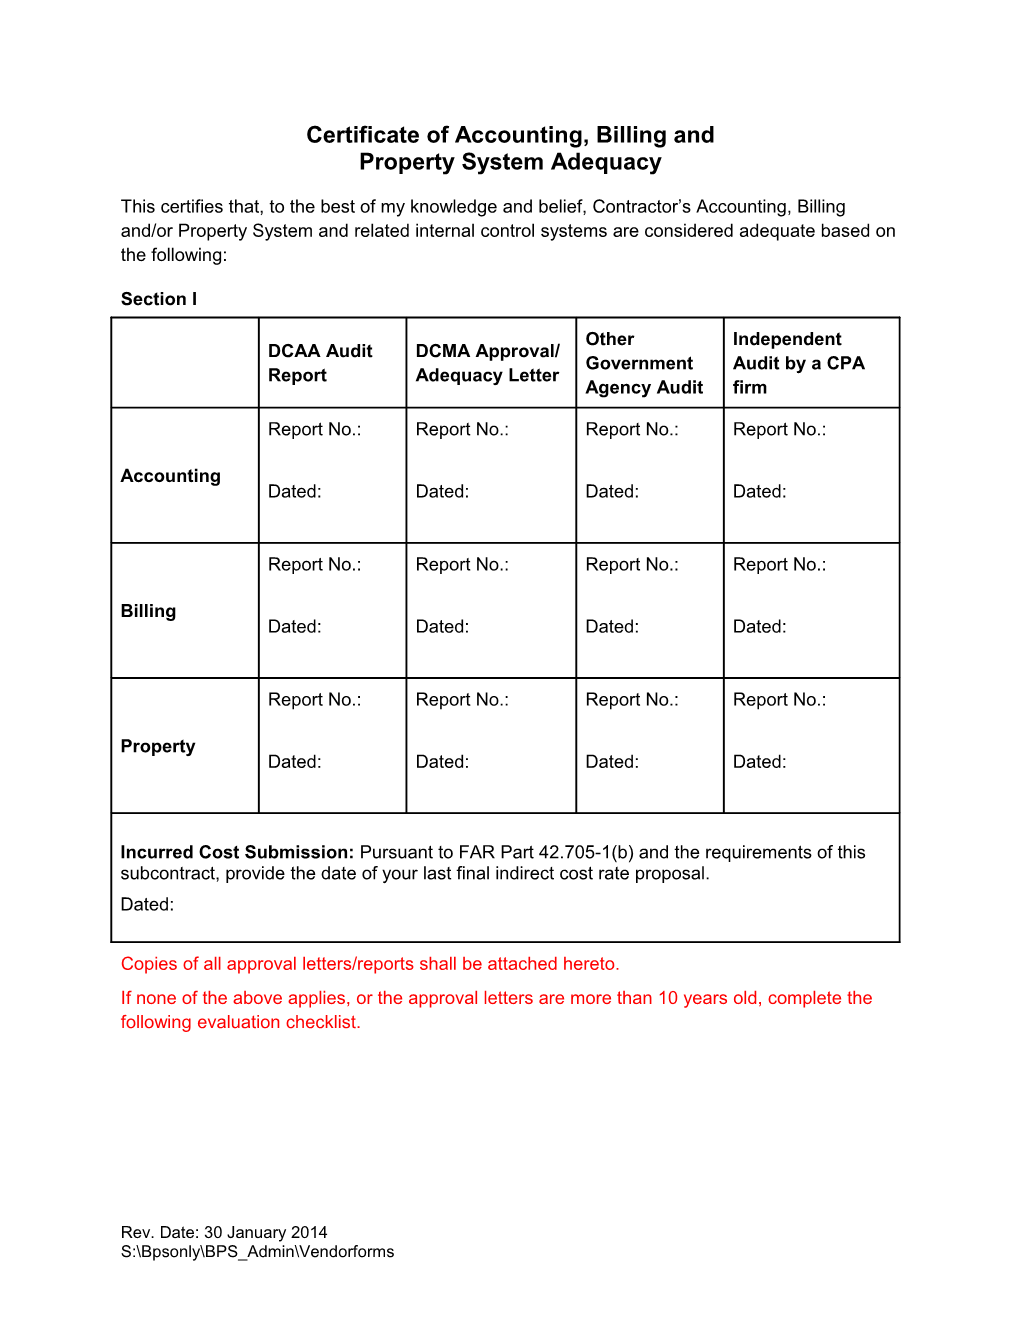 Certificate of Accounting and Billing System Adequacy